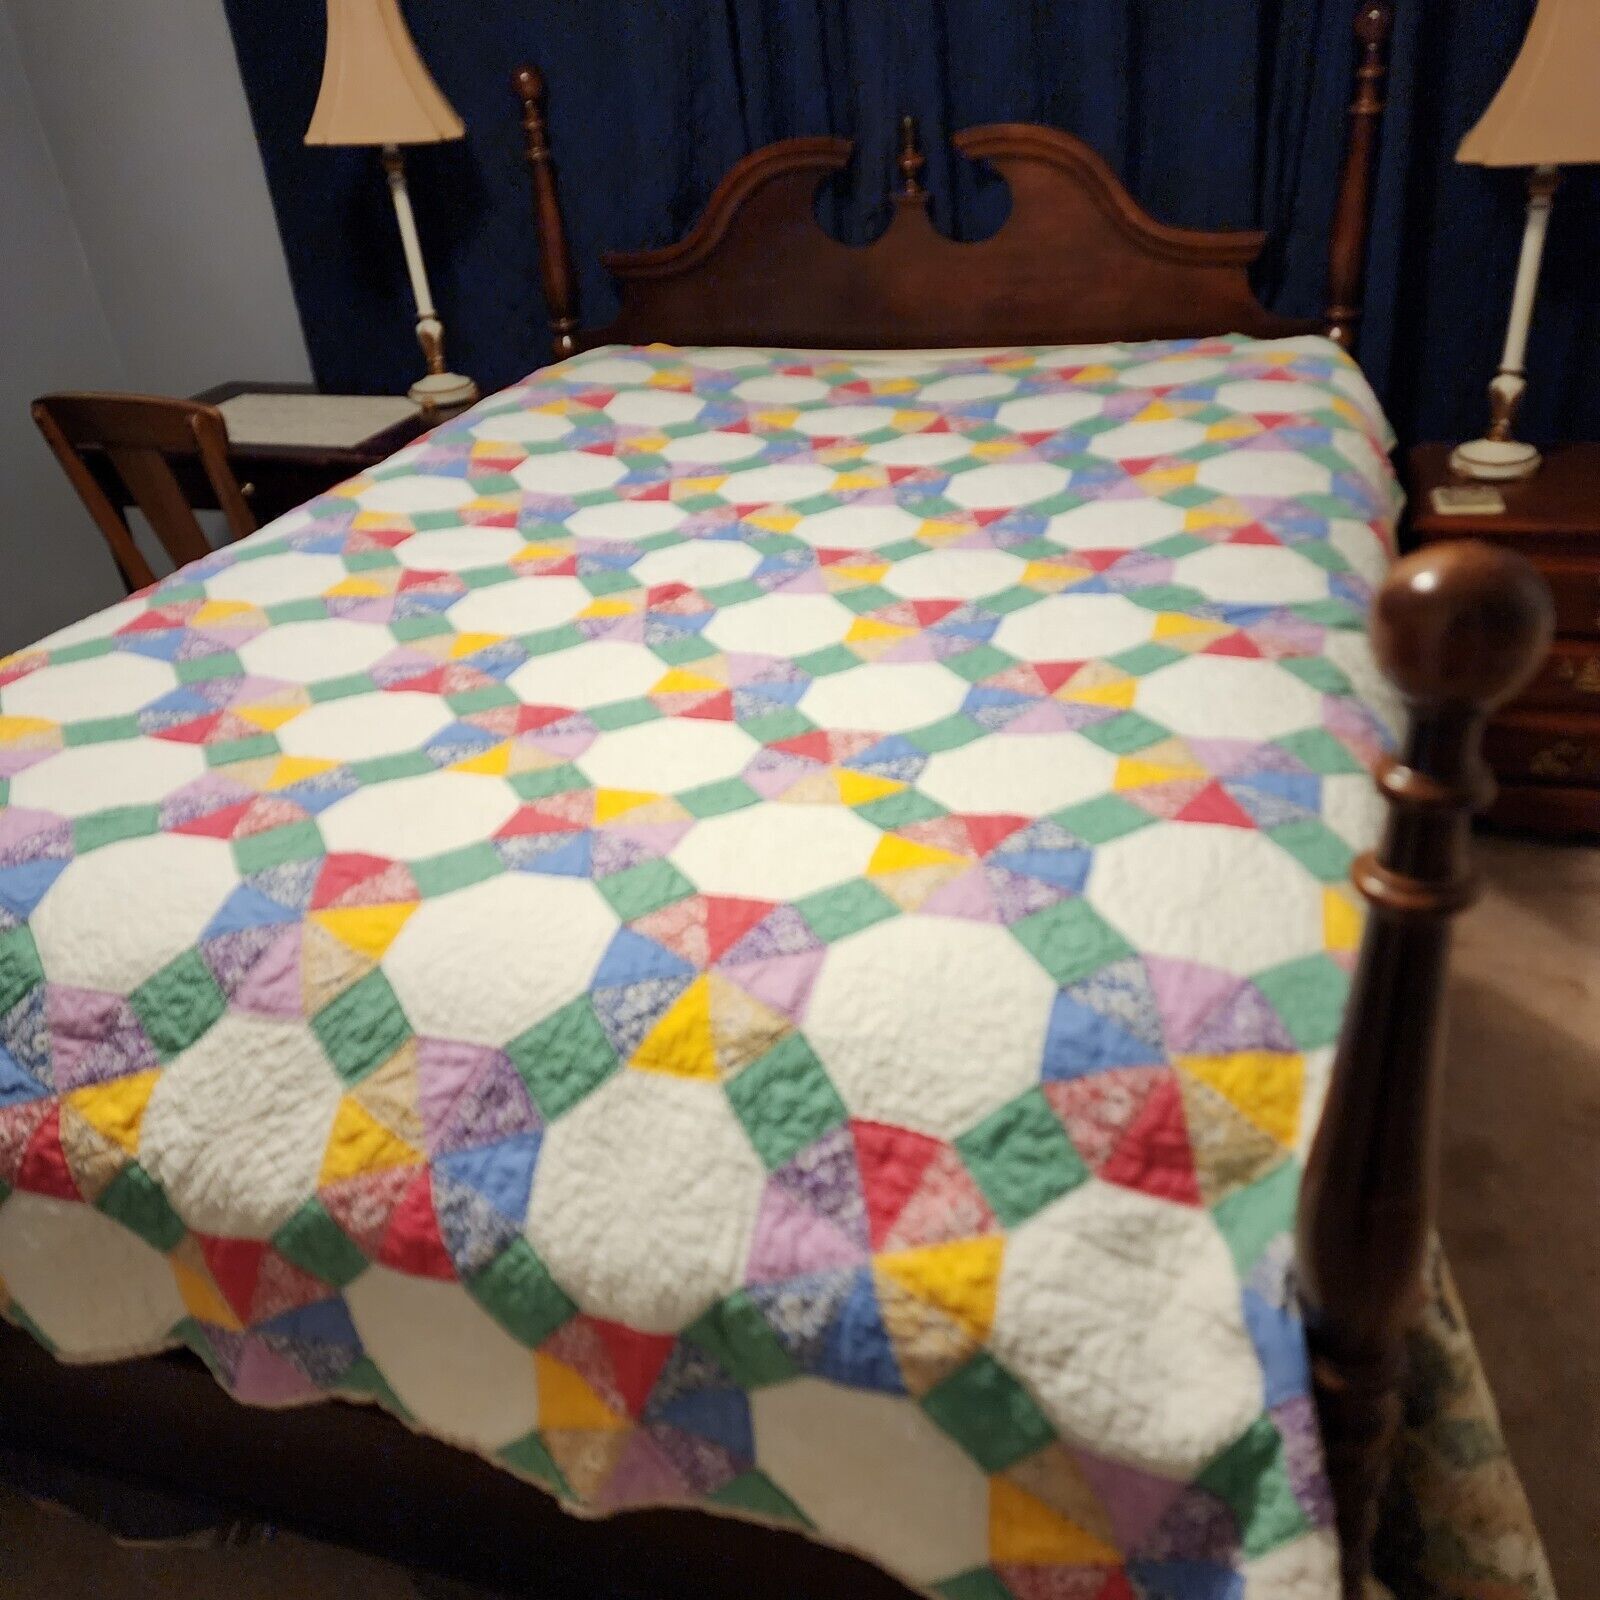 Fall Sale 1930s Hand Quilted Bedspread Queen Single Diamond Snowball $100 Off